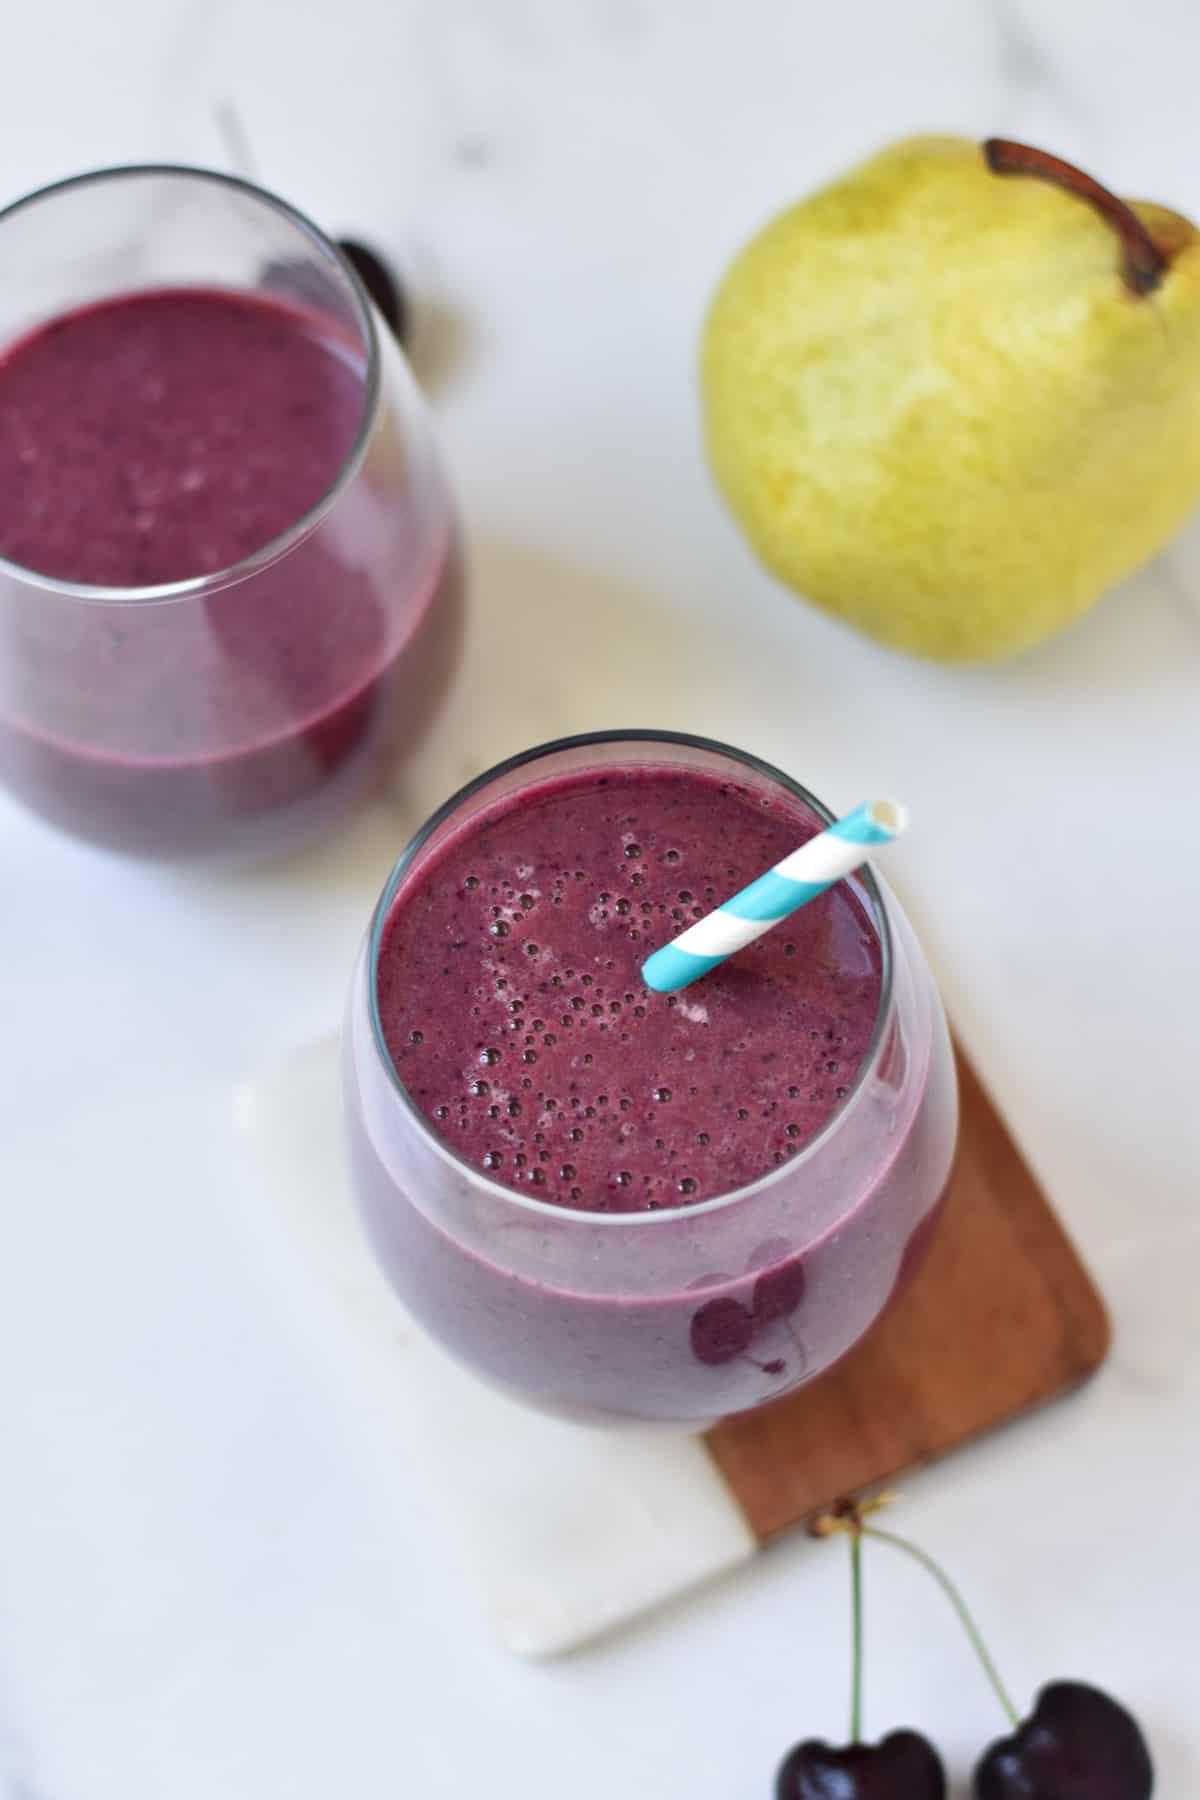 Two berry smoothies in glass cups next to a whole pear and cherries.